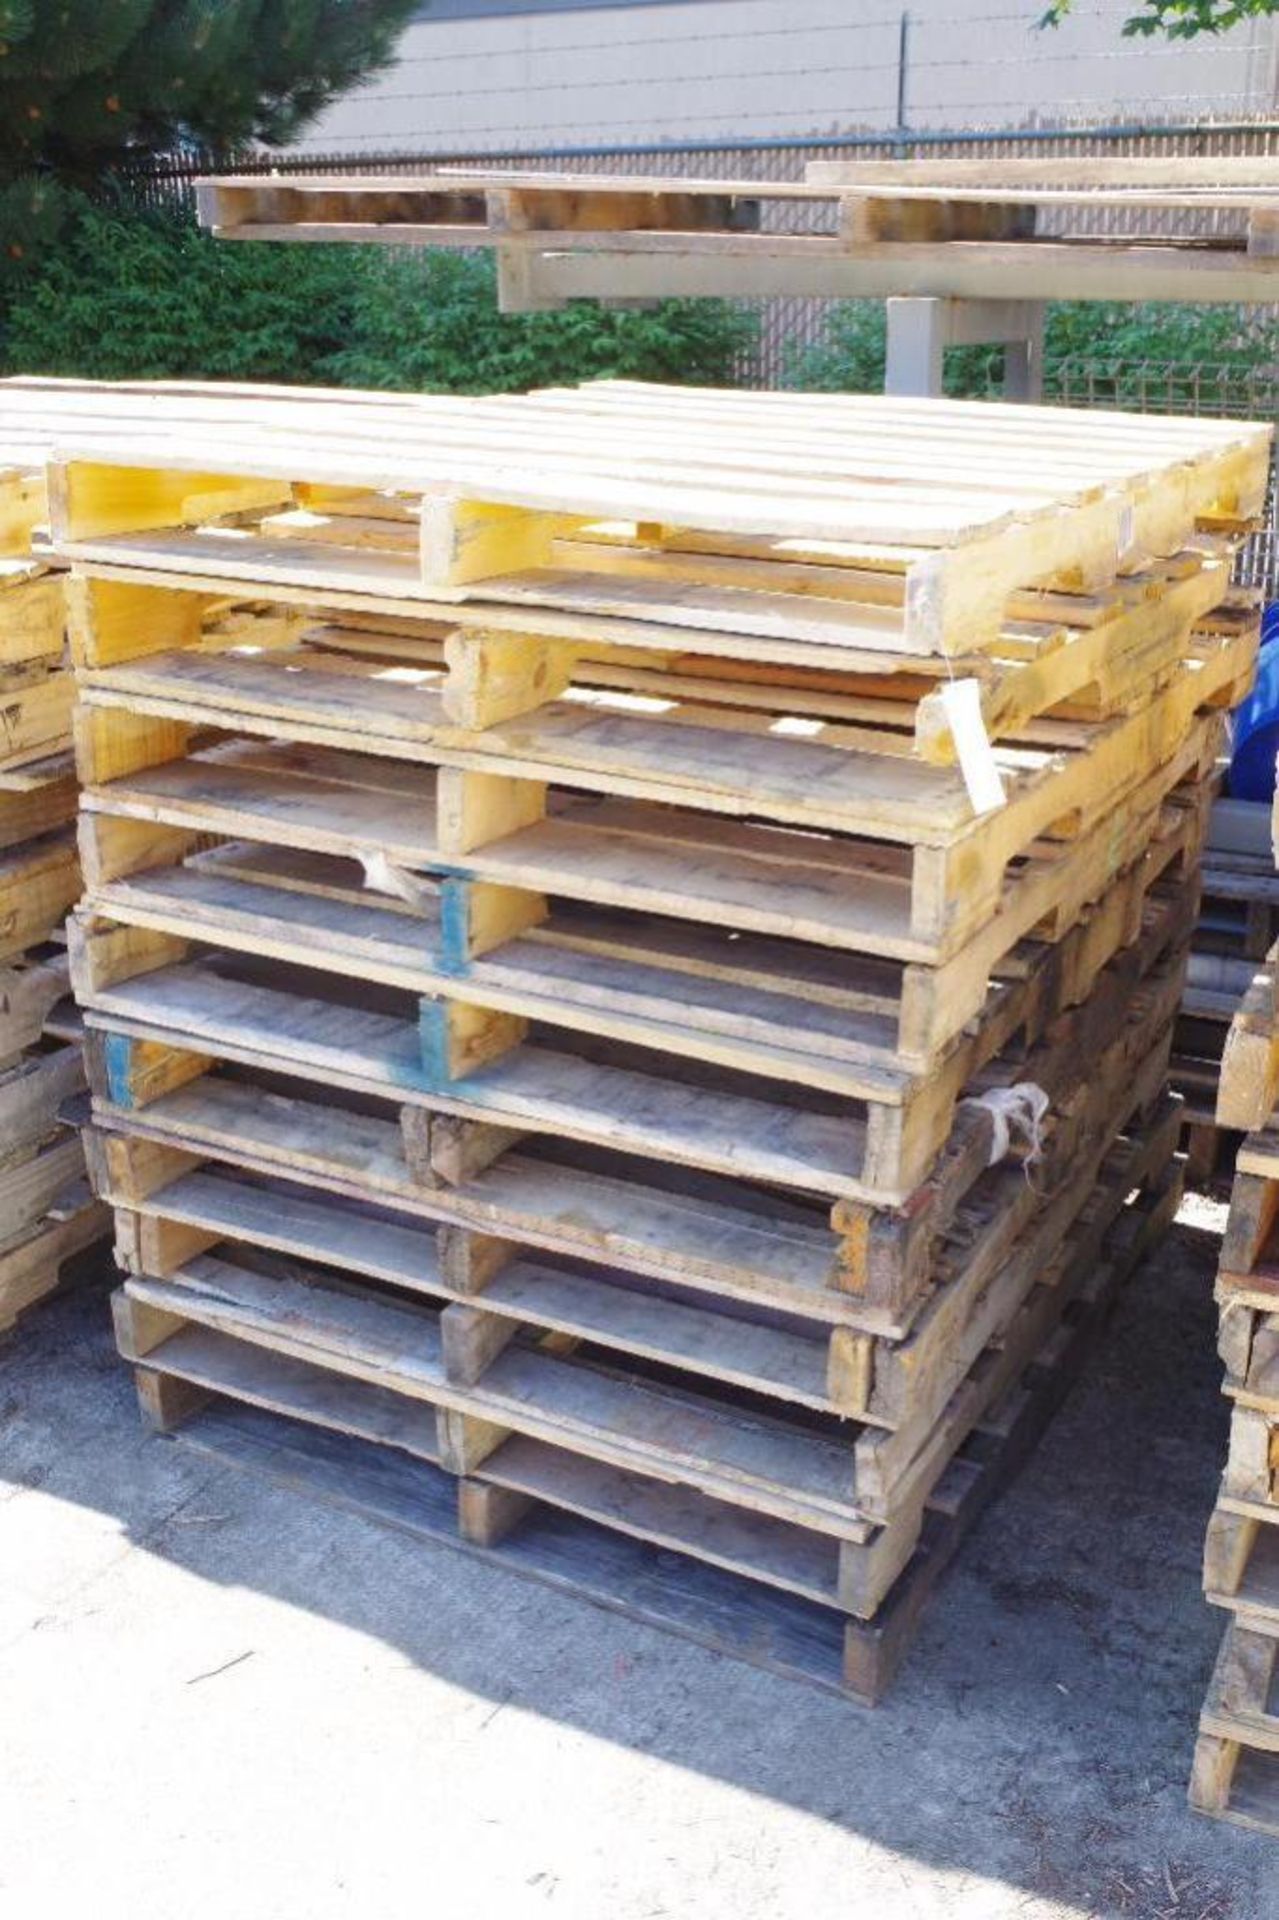 (10) 40"W x 48"L Wood Pallets, Mixed Quality, Some Rough